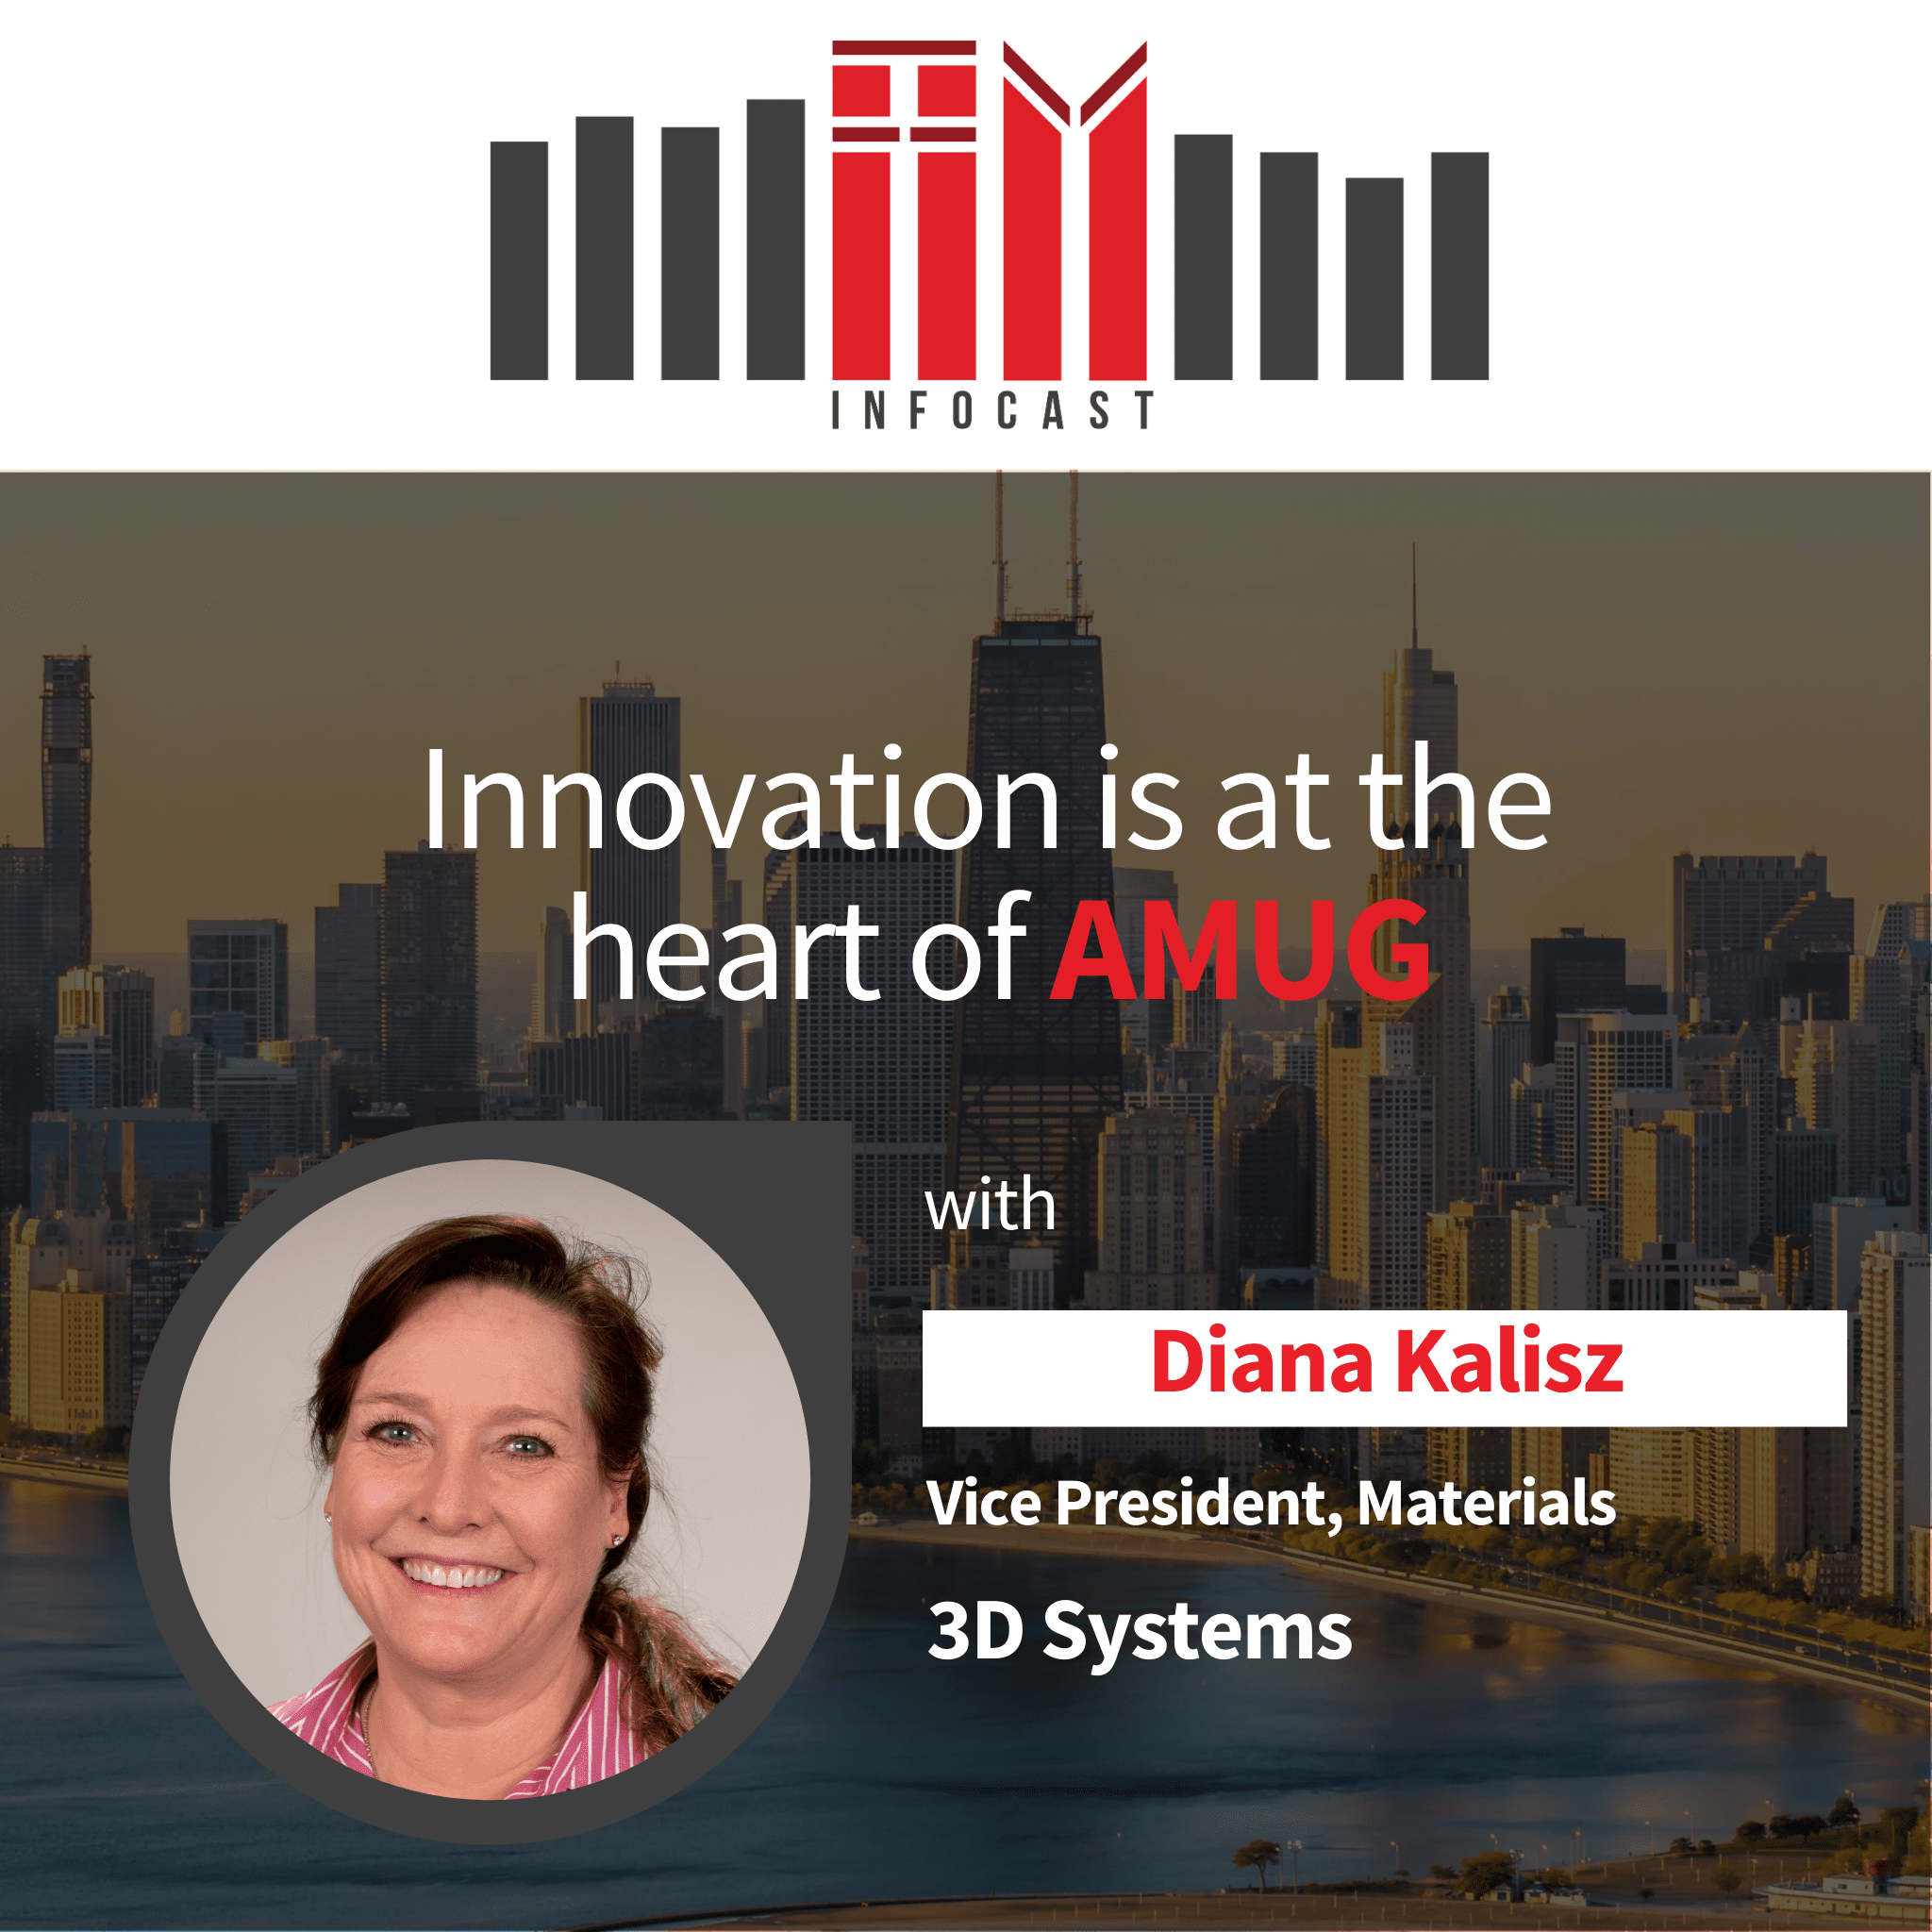 Innovation is at the heart of AMUG with Diana Kalisz